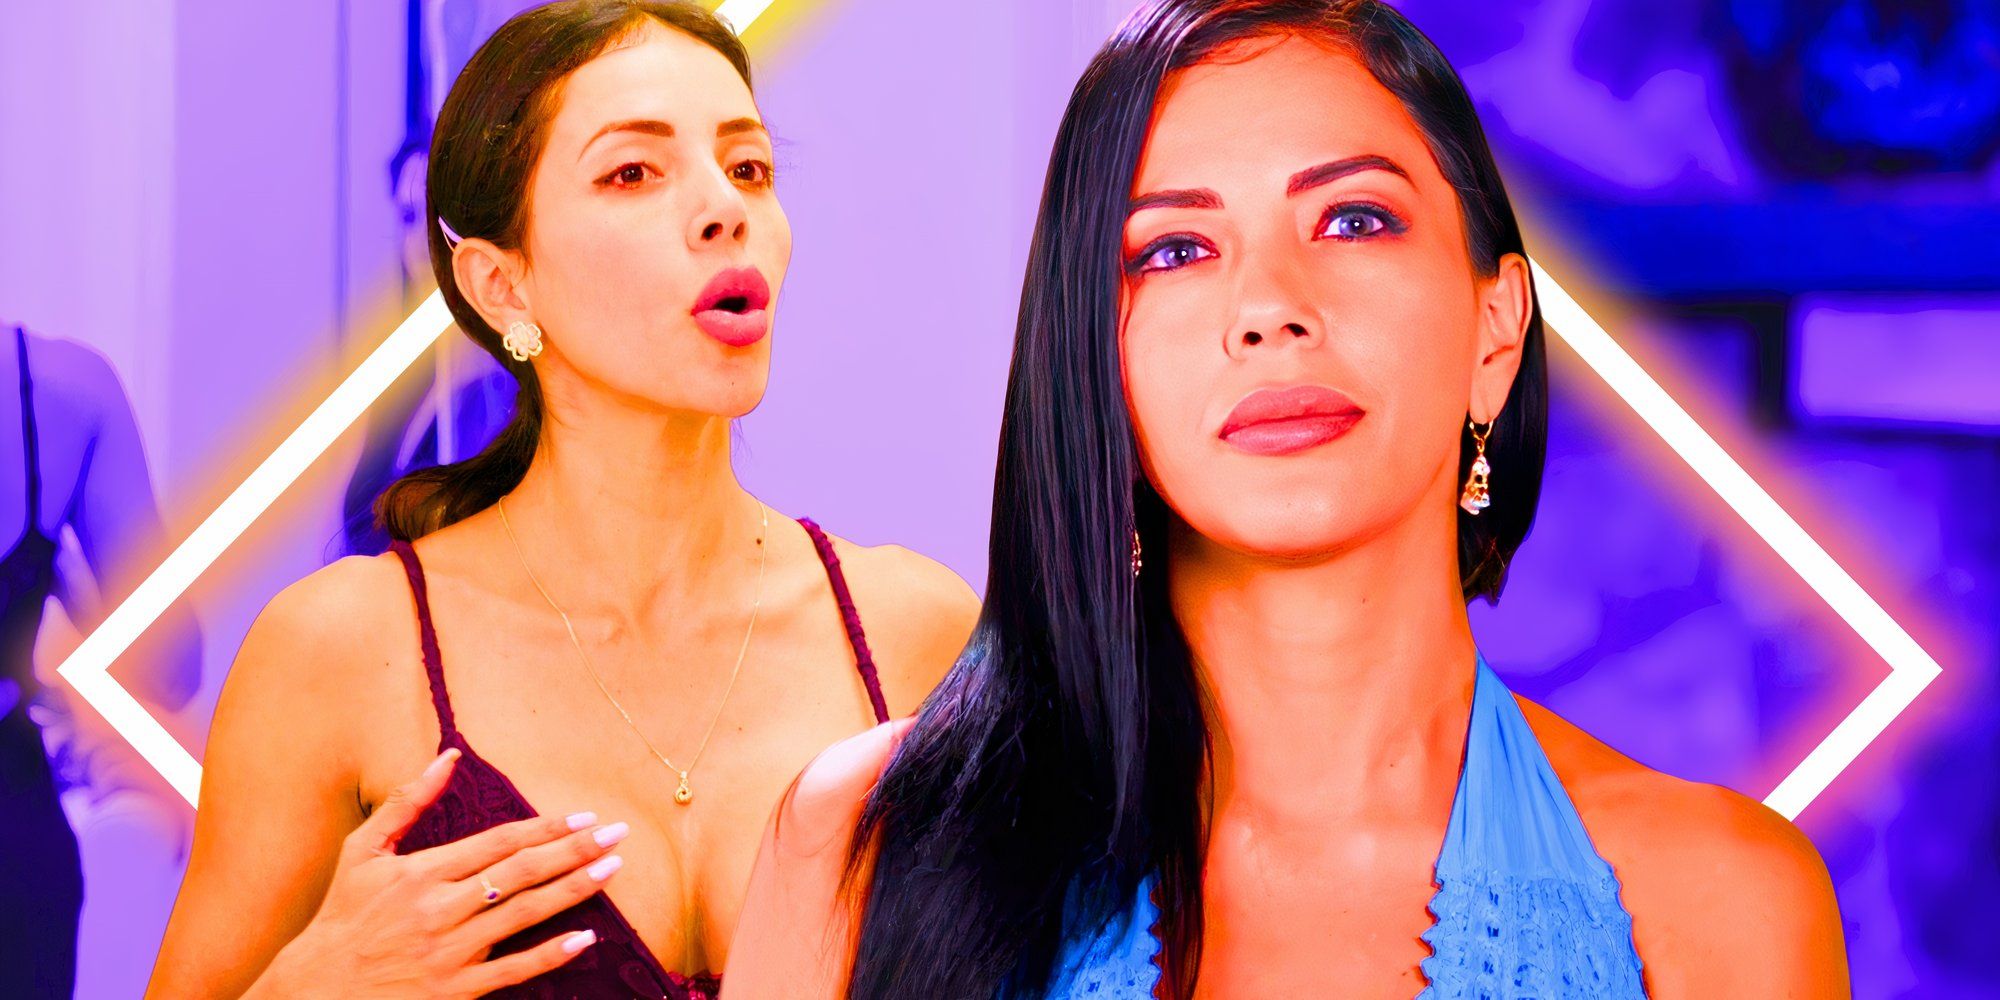 90 Day Fiance's Jasmine Pineda talks stares straight ahead in a montage image.